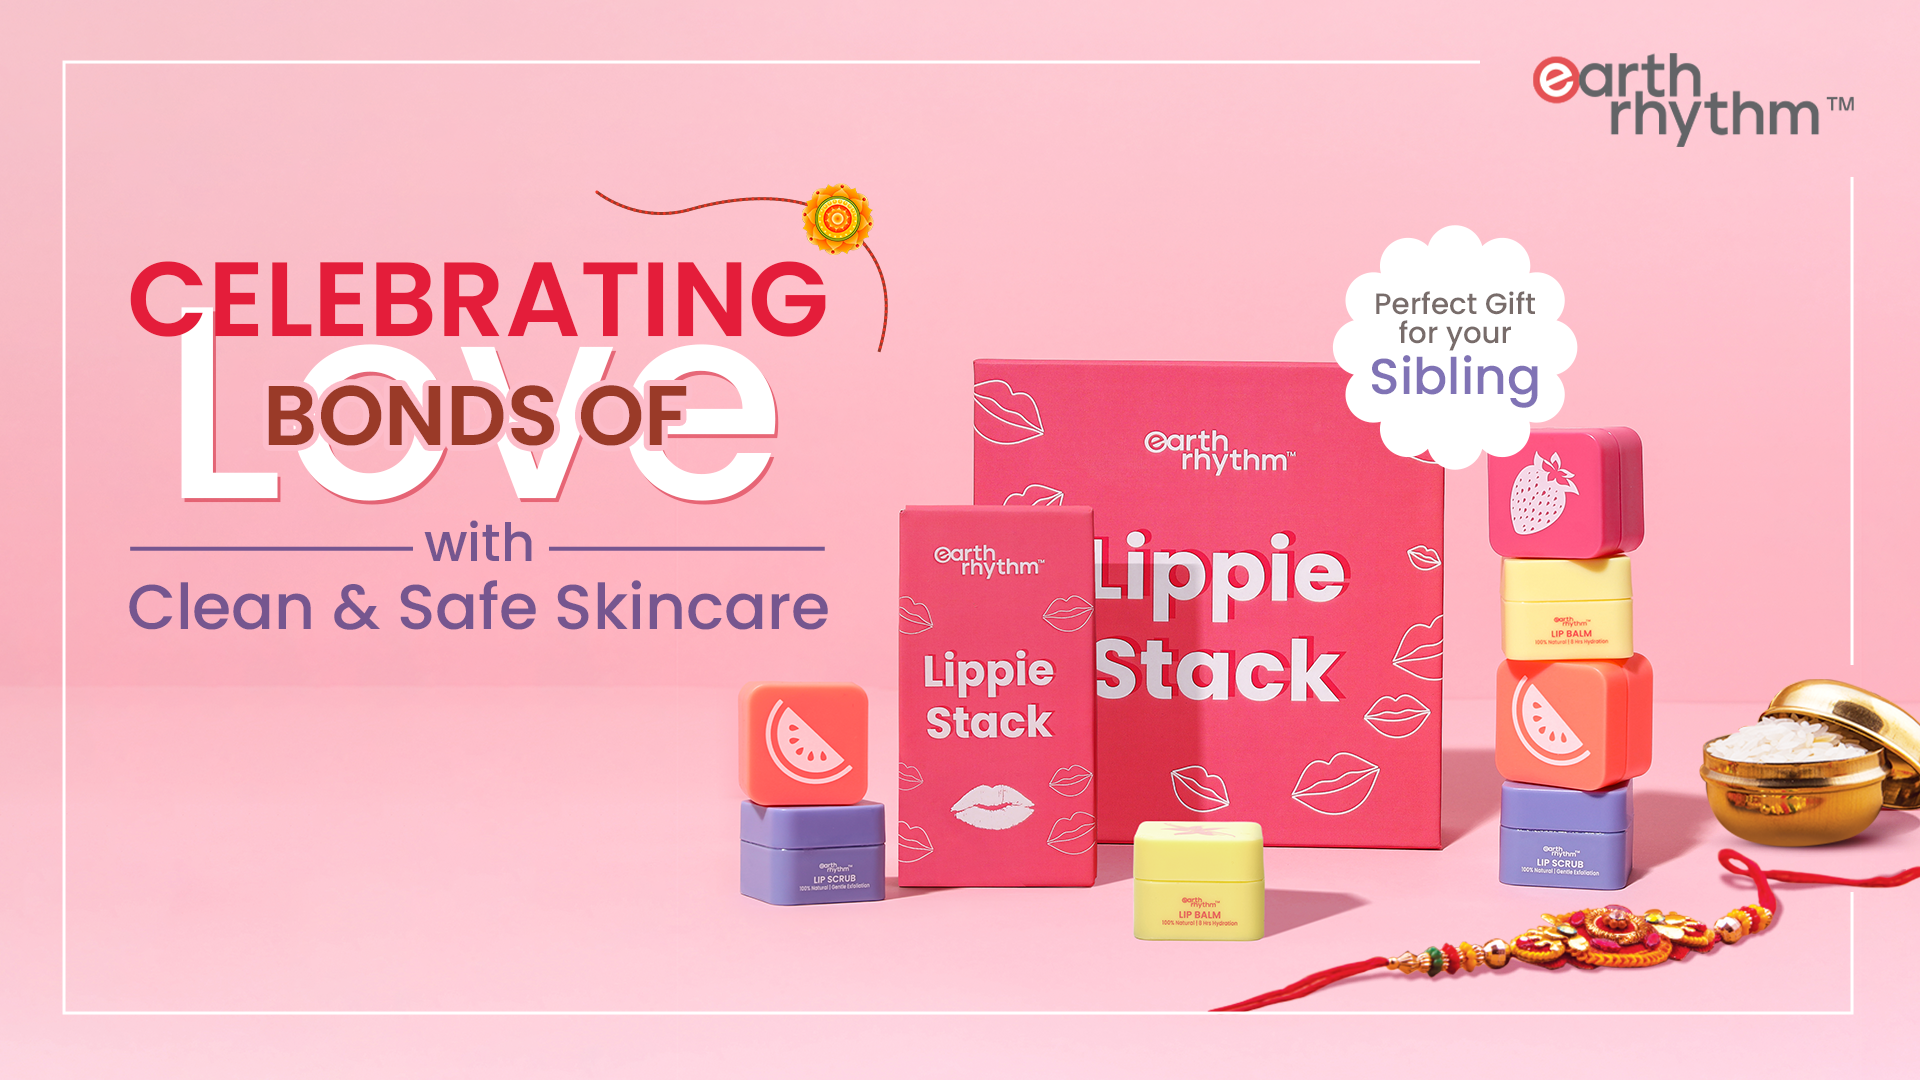 Celebrating Bonds of Love with Clean & Safe Skincare